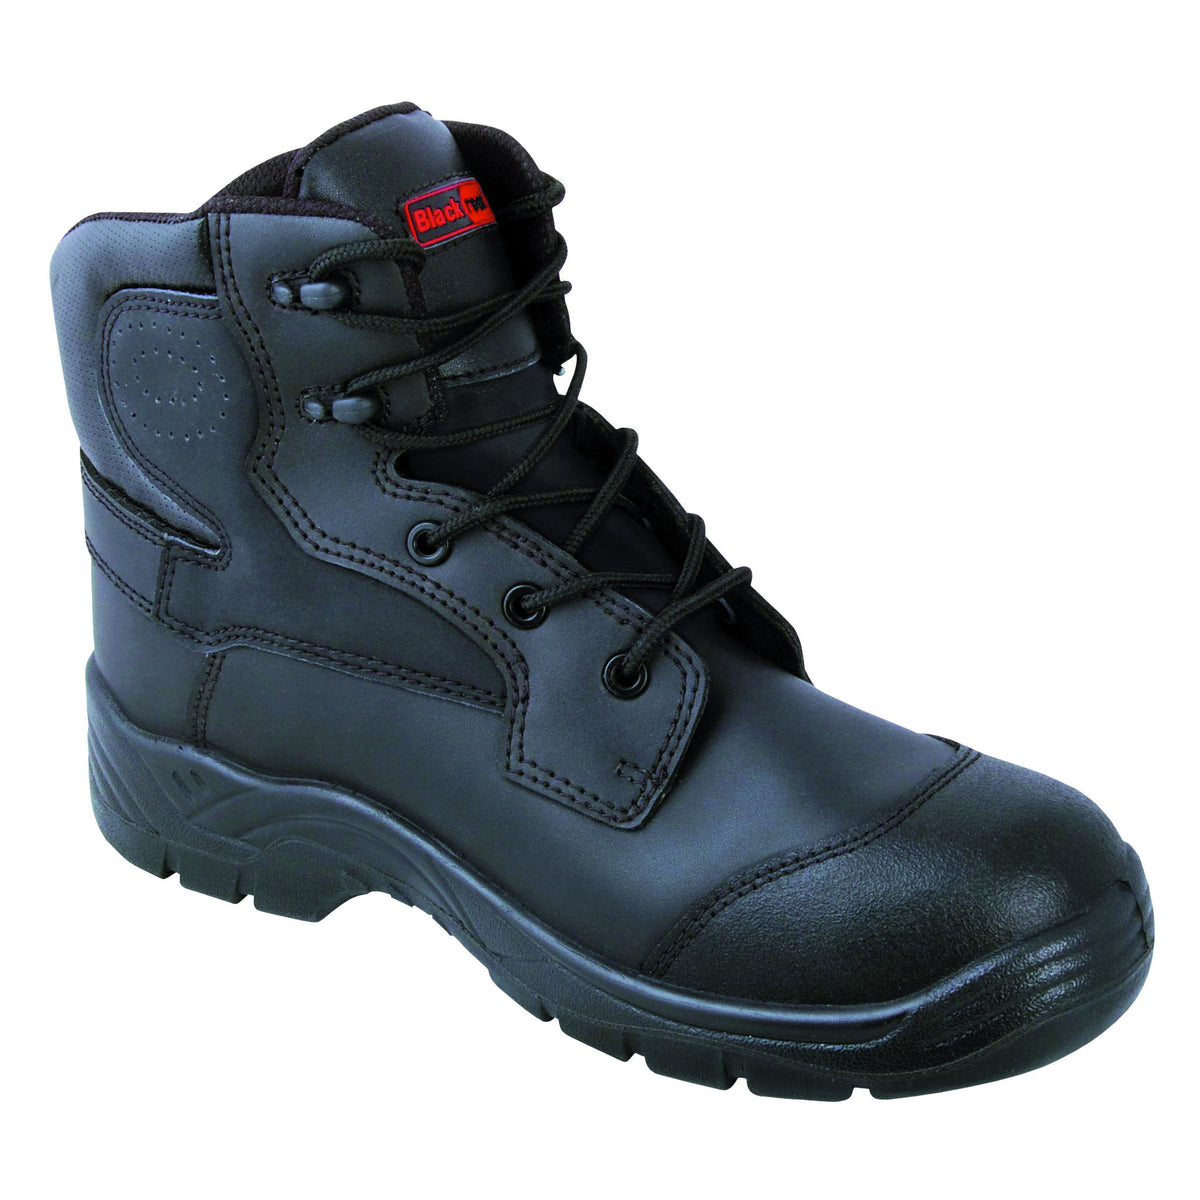 Safety Boot Composite - peterdrew.com
